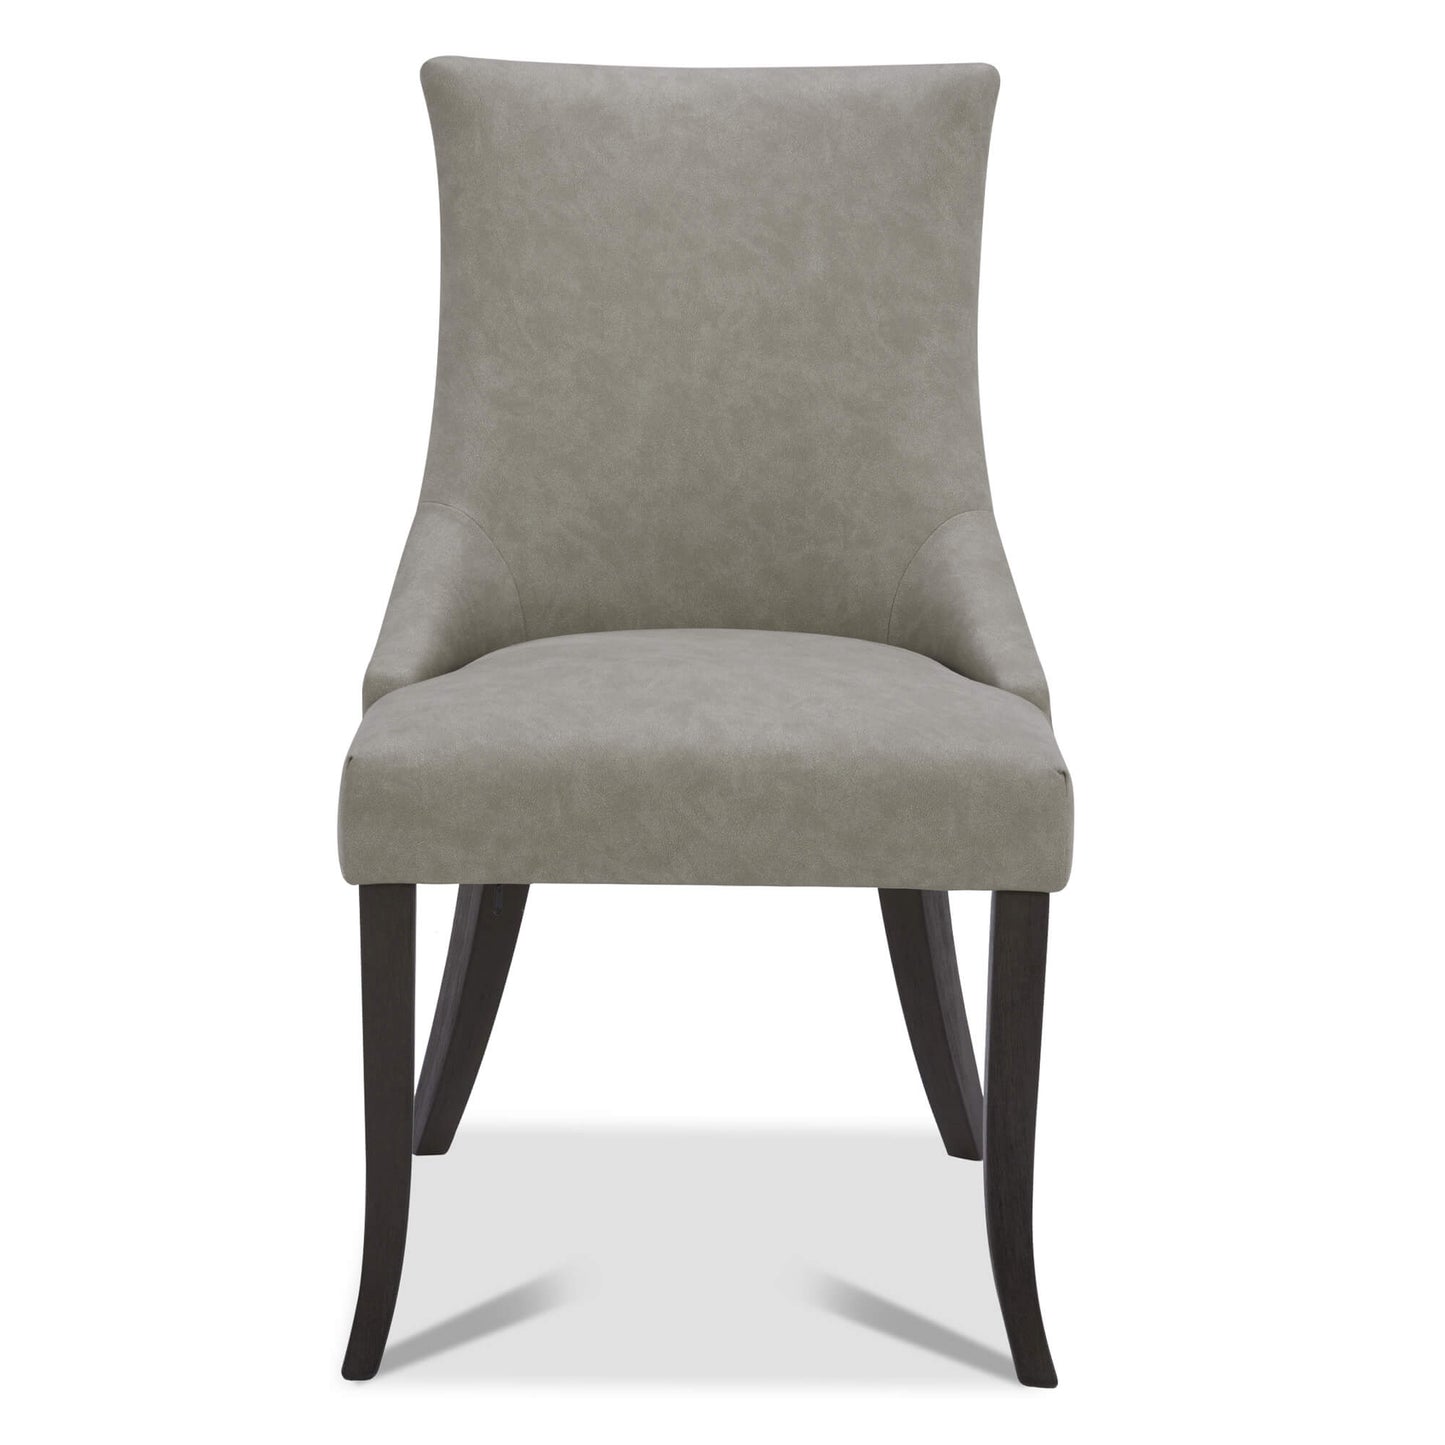 CHITA LIVING-Mia Romantic Dining Chair (Set of 2)-Dining Chairs-Faux Leather-Stone Gray-